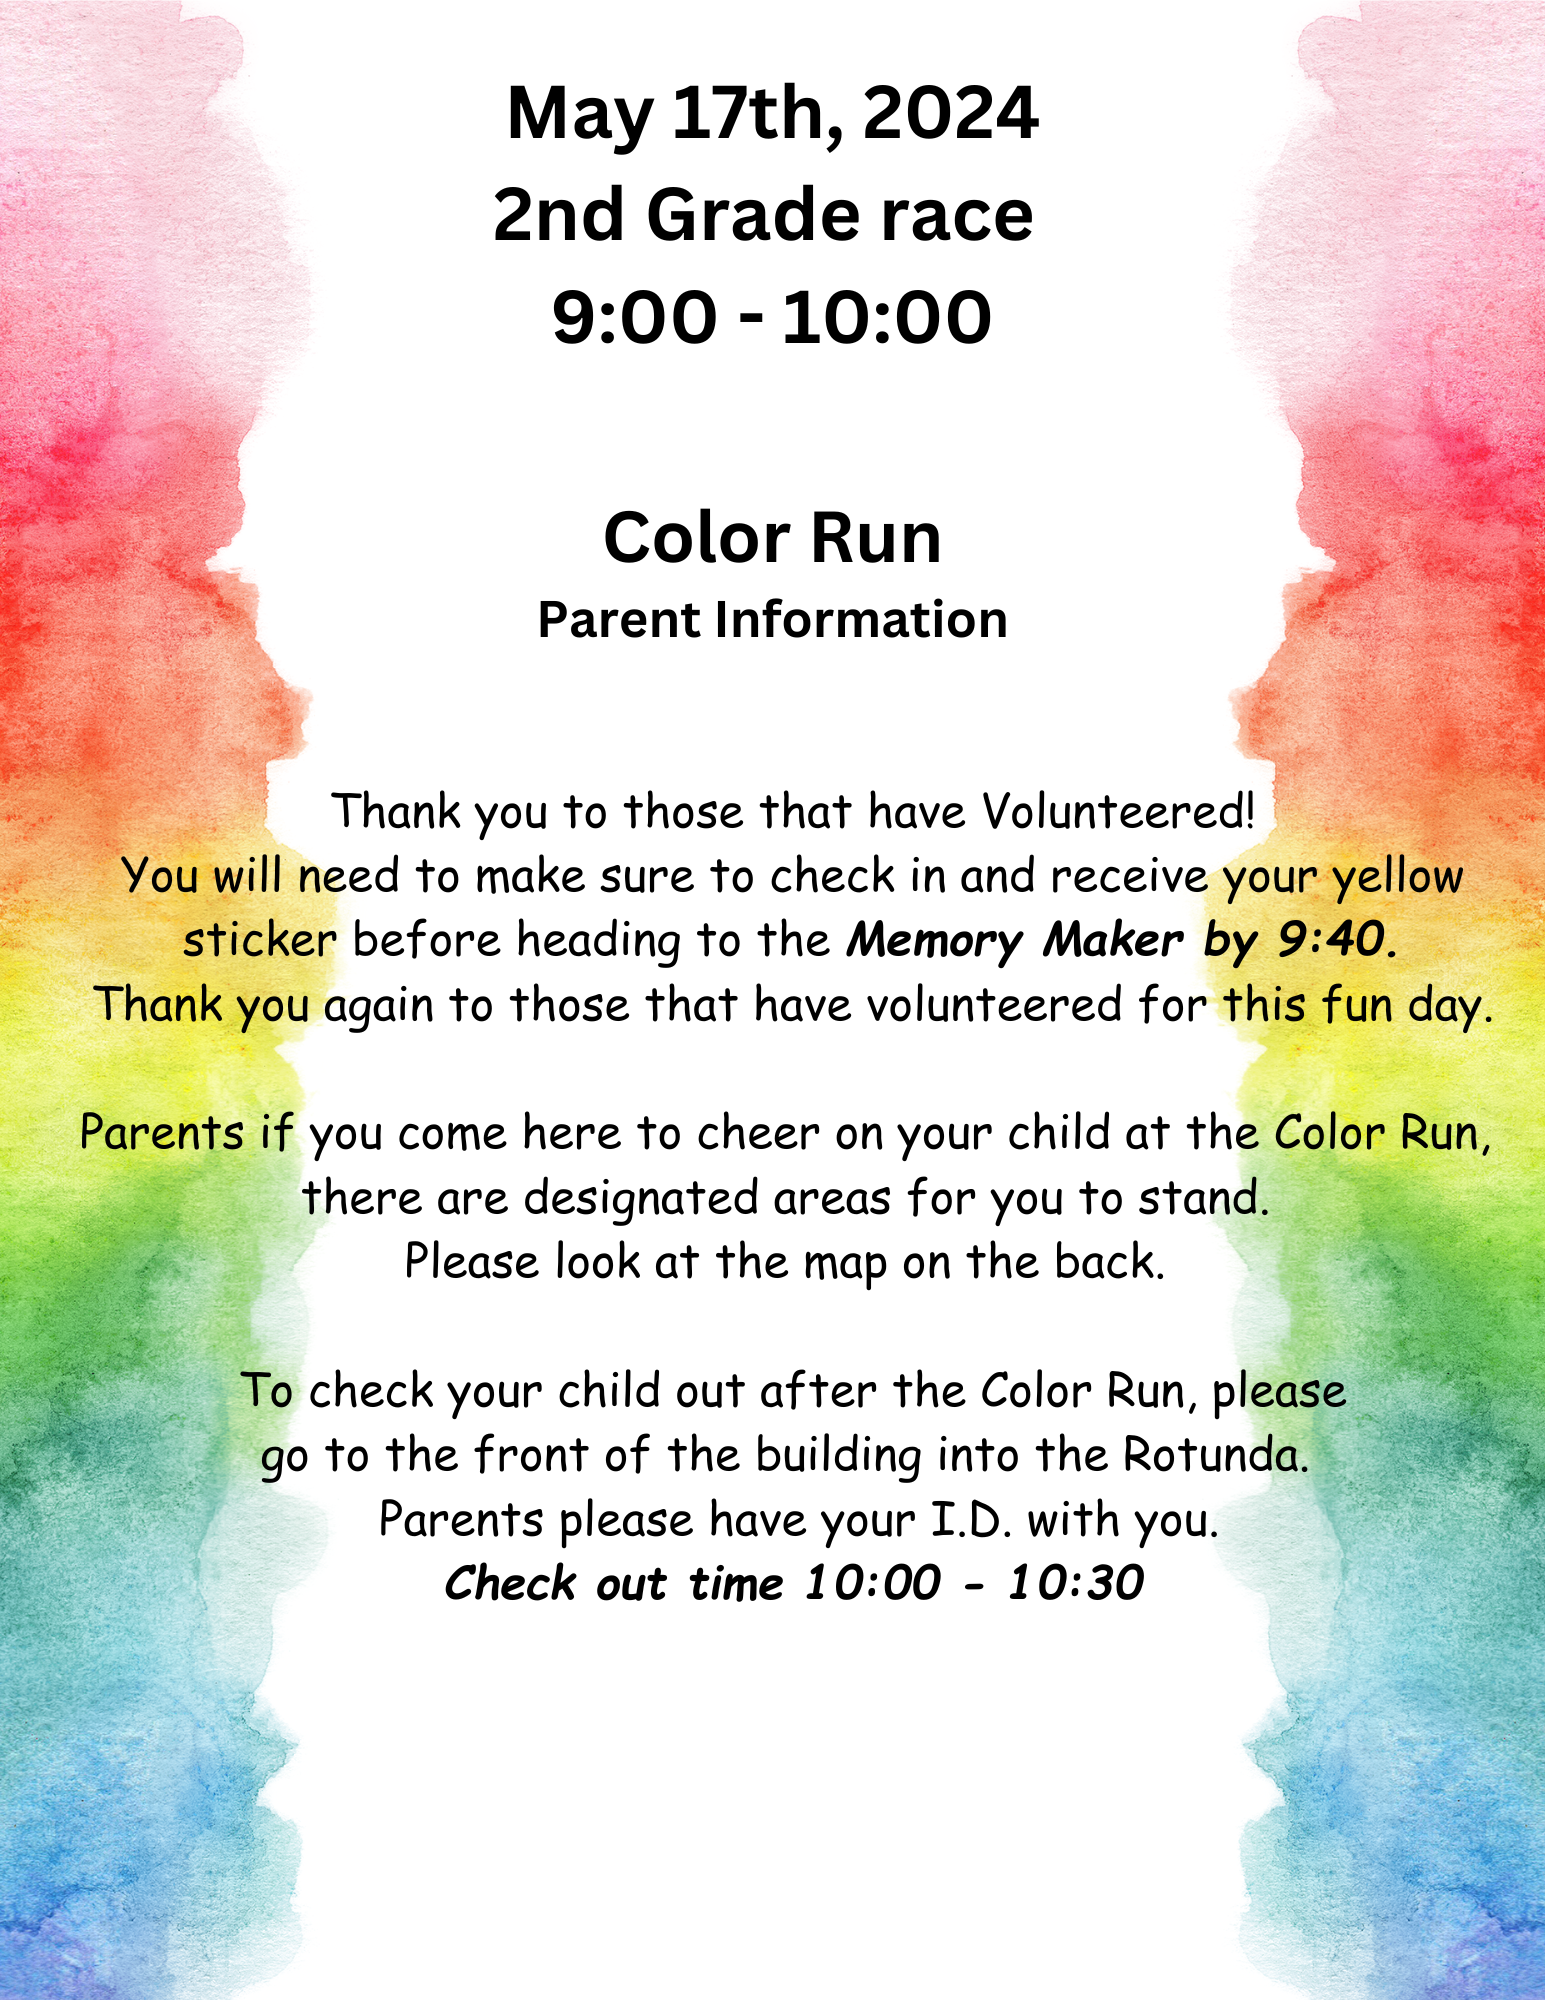 May 17th, 2024 2nd Grade race  9:00 - 10:00 Thank you to those that have Volunteered! You will need to make sure to check in and receive your yellow sticker before heading to the Memory Maker by 9:40. Thank you again to those that have volunteered for this fun day.  Parents if you come here to cheer on your child at the Color Run,  there are designated areas for you to stand.  Please look at the map on the back.   To check your child out after the Color Run, please go to the front of the building into the Rotunda.   Parents please have your I.D. with you. Check out time 10:00 - 10:30